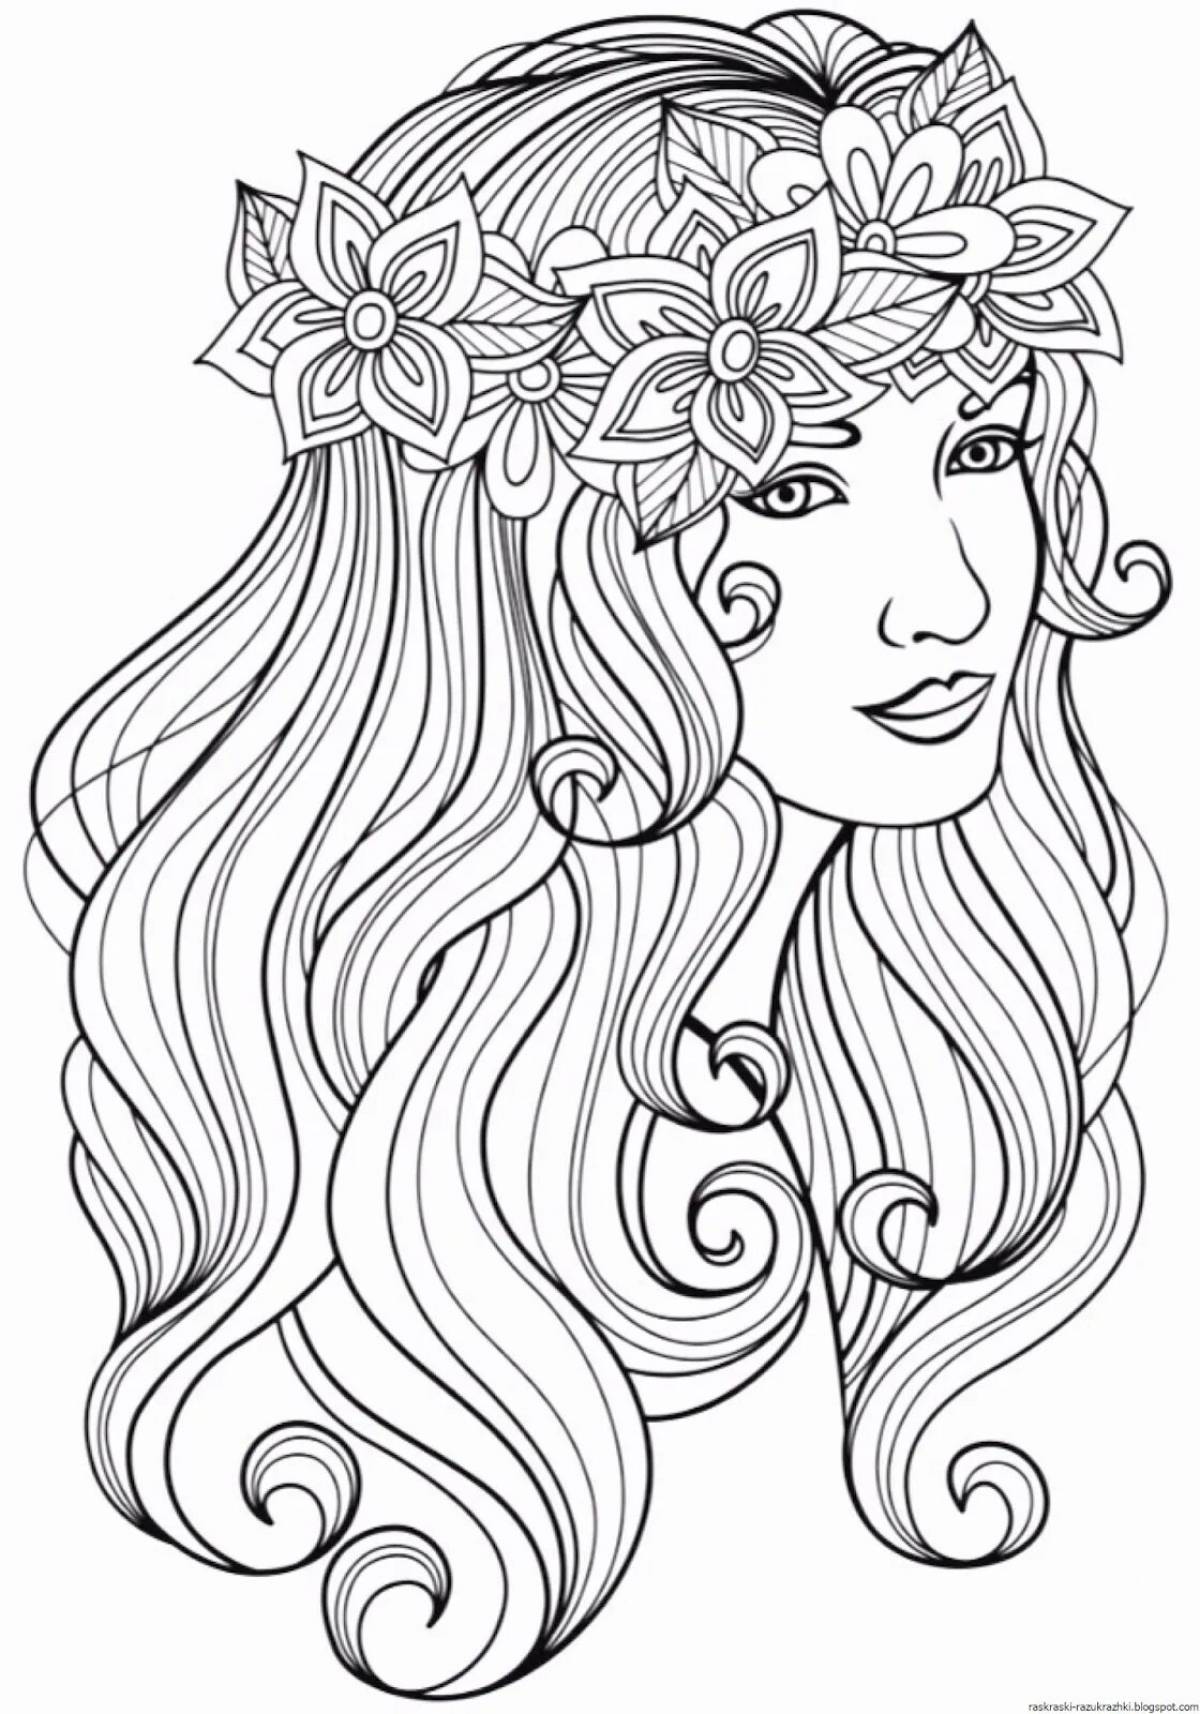 Hair coloring page for girls